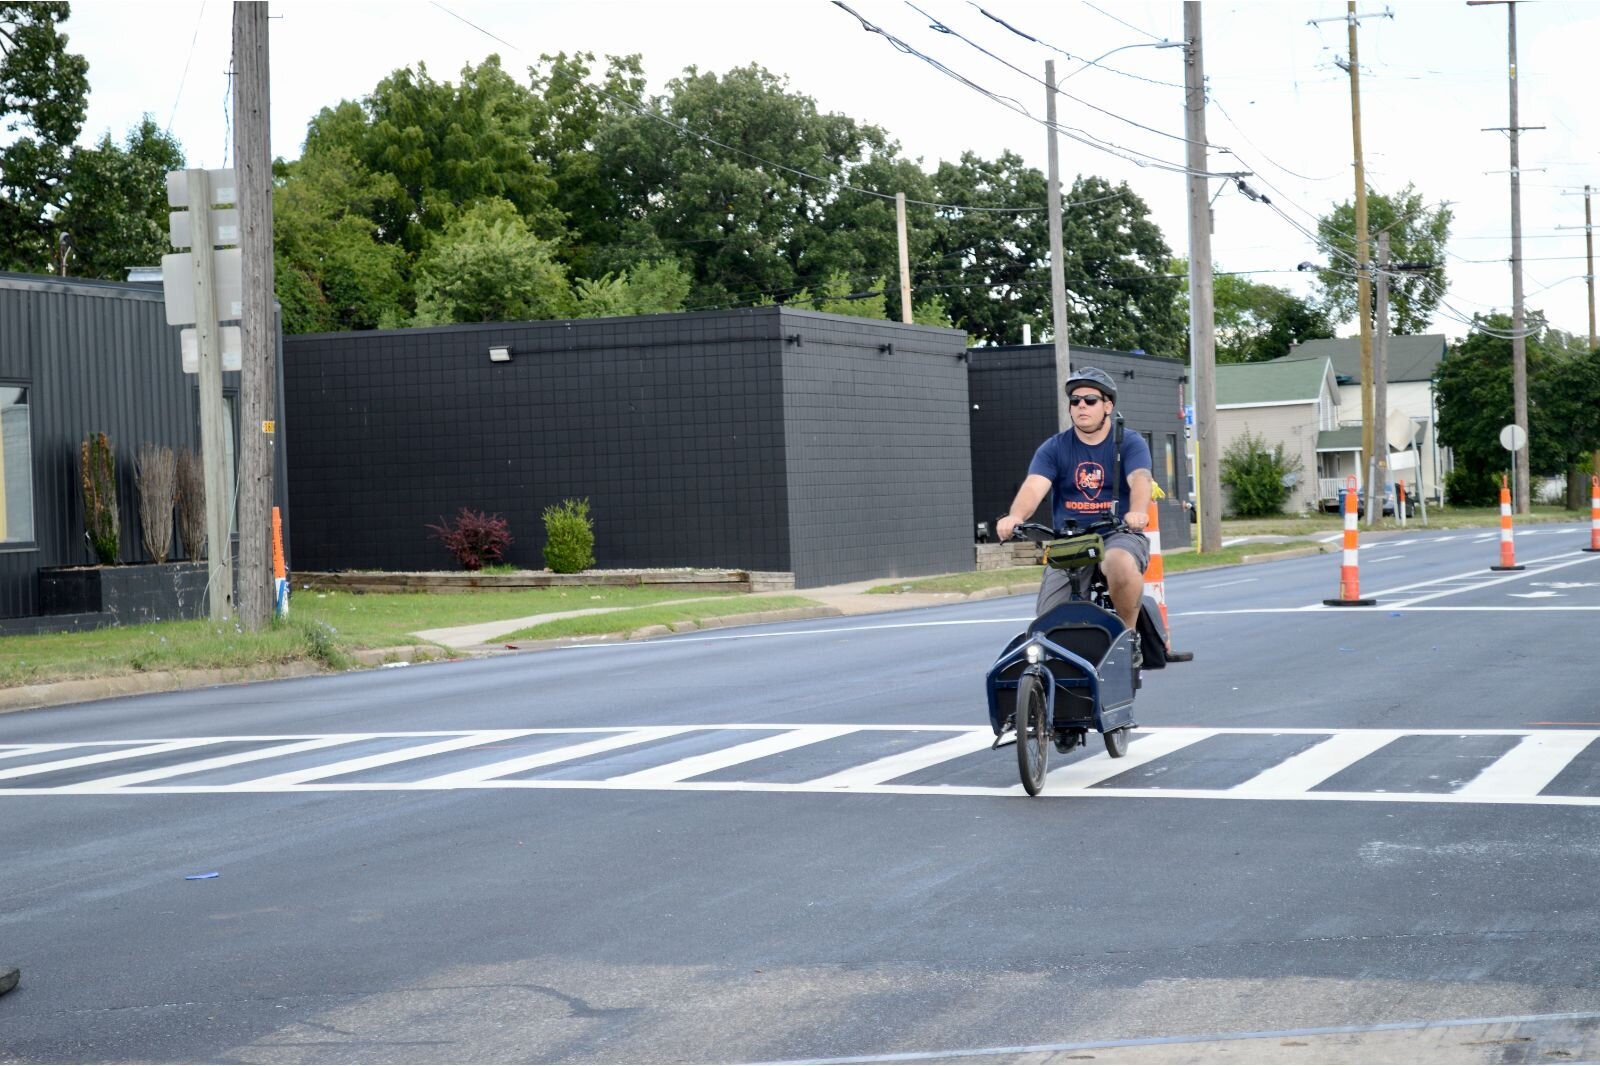 Dustin Black, traffic engineer and head of ModeShift Kalamazoo, tries out the new lanes.